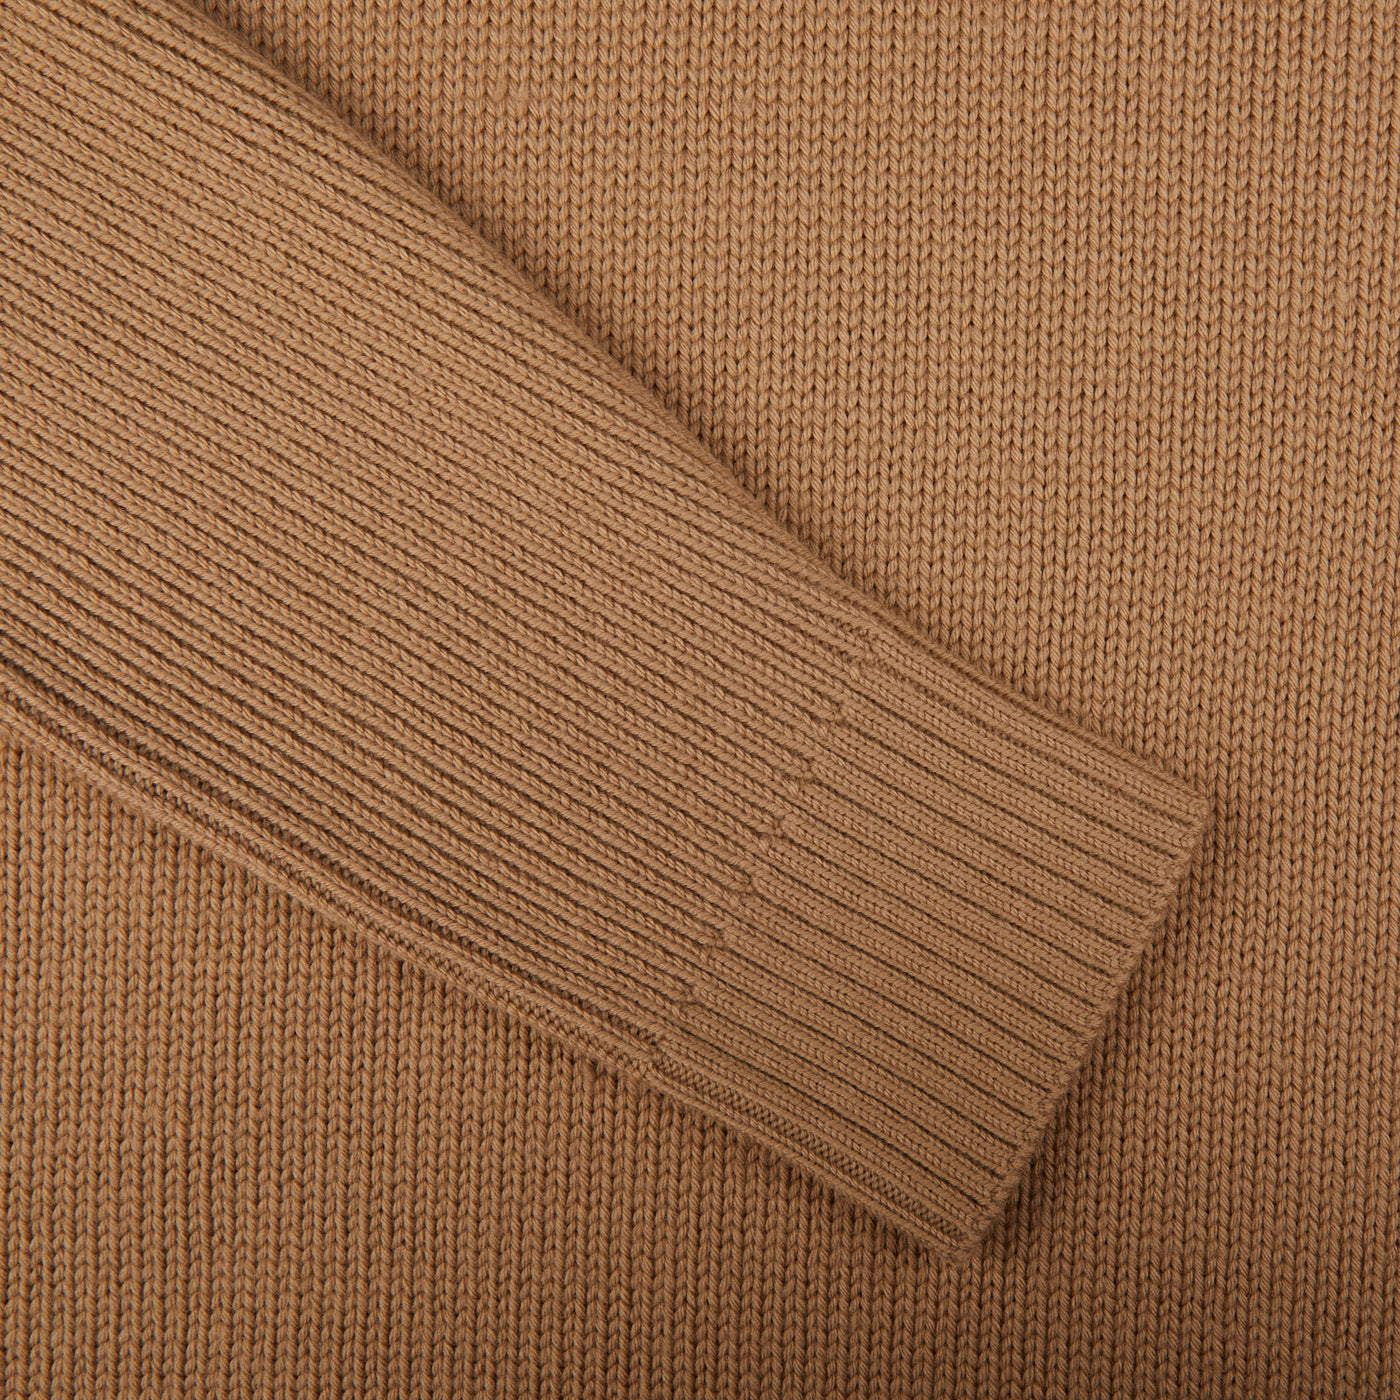 A close up of a Morgano camel beige heavy merino wool rollneck sweater, showcasing its exquisite Italian knitwear.